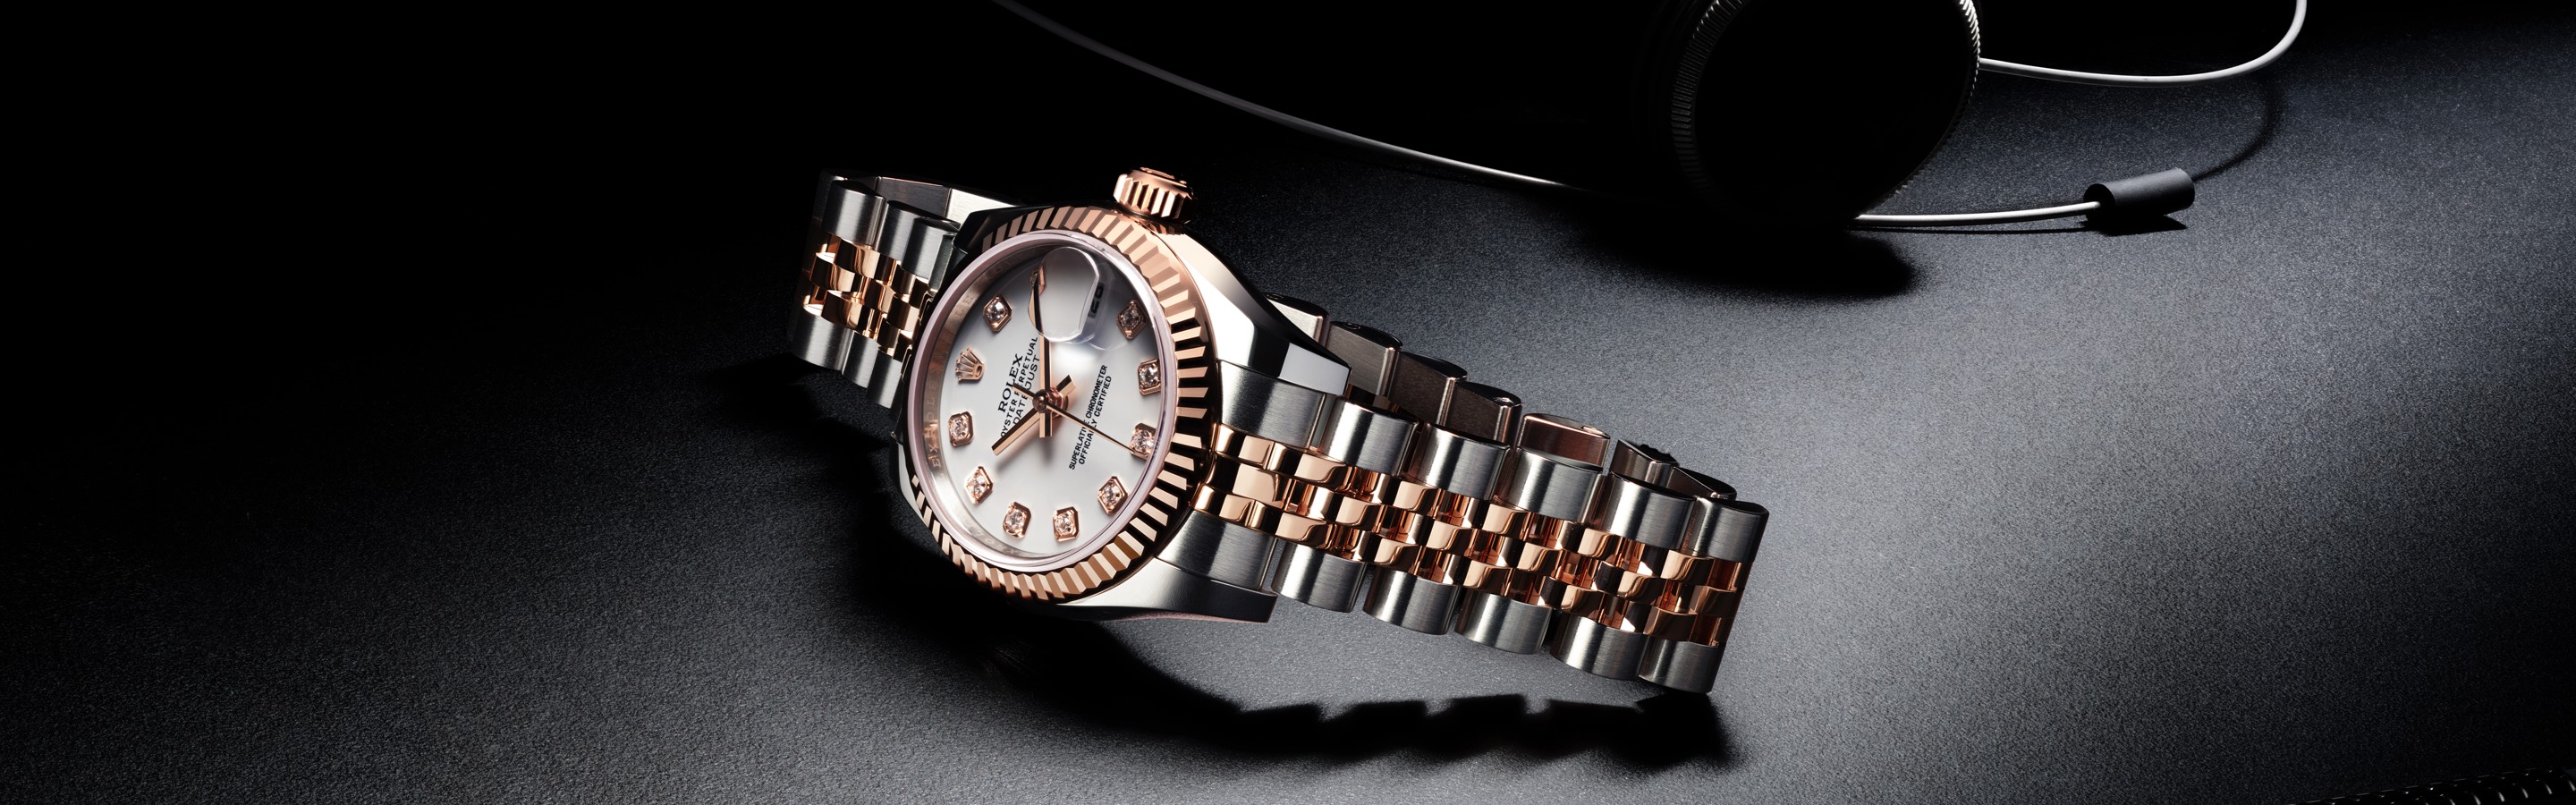 Rolex two-tone silver and rose gold link bracelet watch